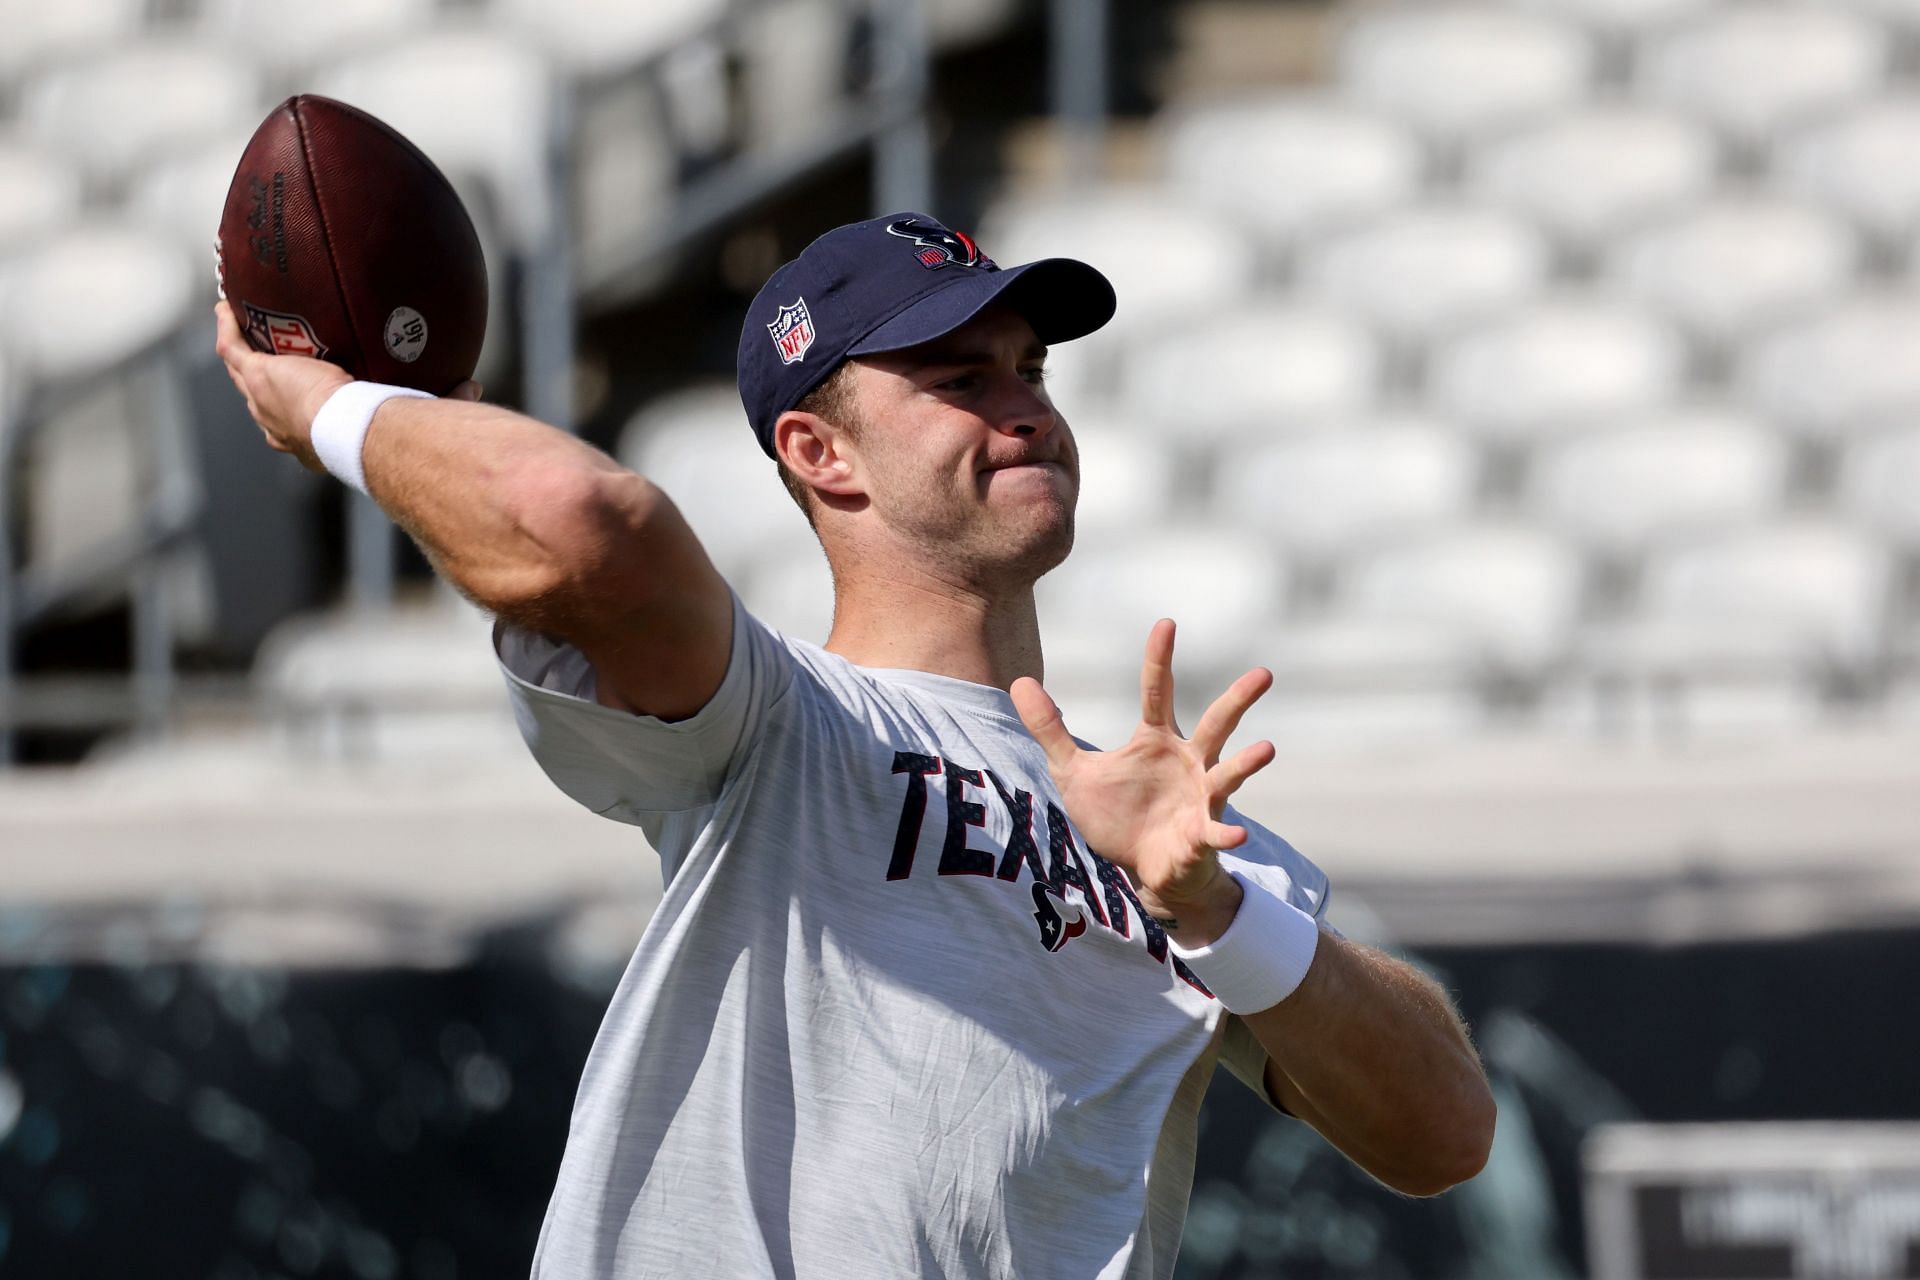 Davis Mills hoping to steer Texans away from drafting rookie QB at NFL Draft